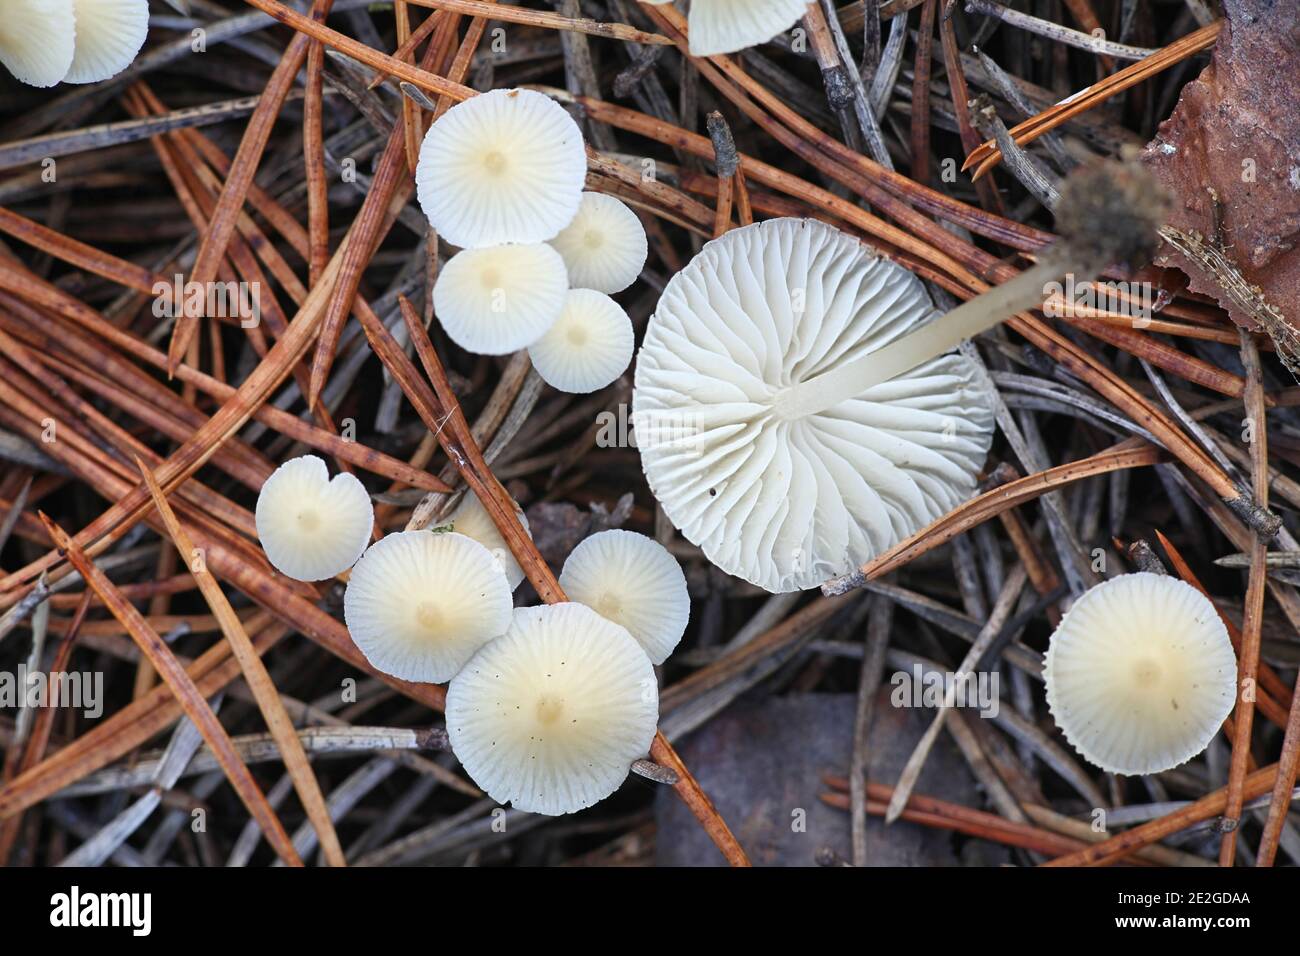 Mycena flavoalba, also called Atheniella flavoalba, commonly known as the ivory bonnet, wild mushroom from Finland Stock Photo